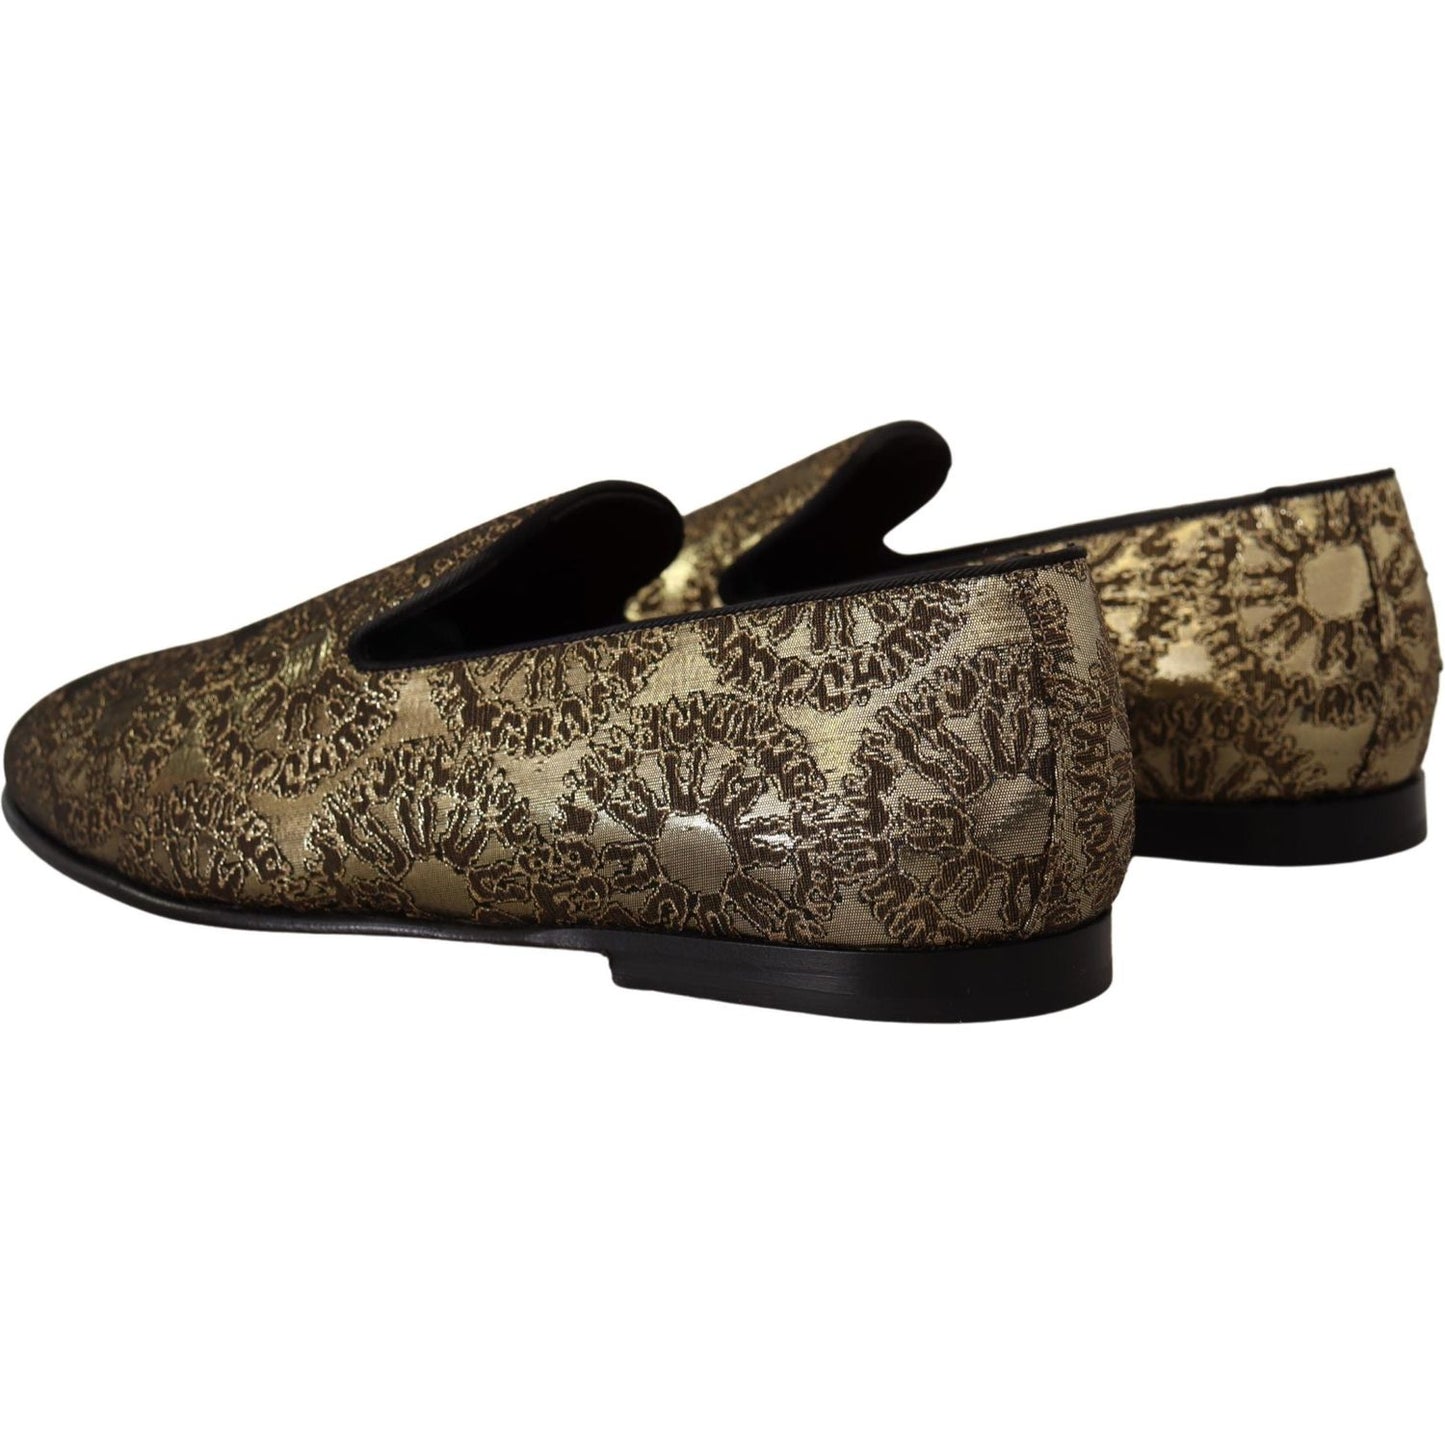 Dolce & Gabbana Gold Tone Loafers Slides Dress Shoes gold-jacquard-flats-mens-loafers-shoes-1 IMG_0877-scaled-4b333ac9-b7b.jpg